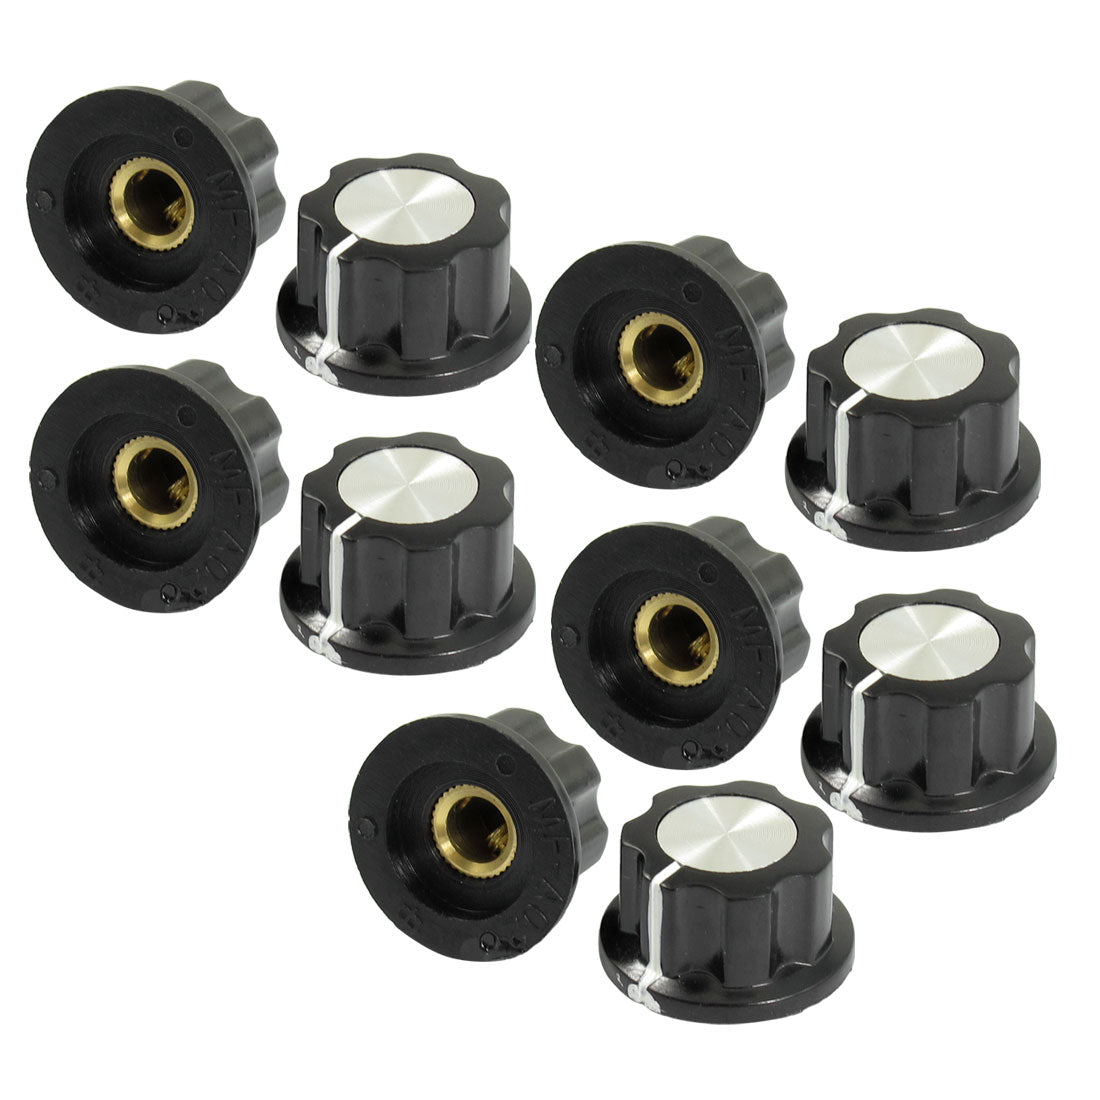 uxcell Uxcell 10 Pcs Black Silver Tone 19mm Top Rotary Knobs for 6mm Dia. Shaft Potentiometer